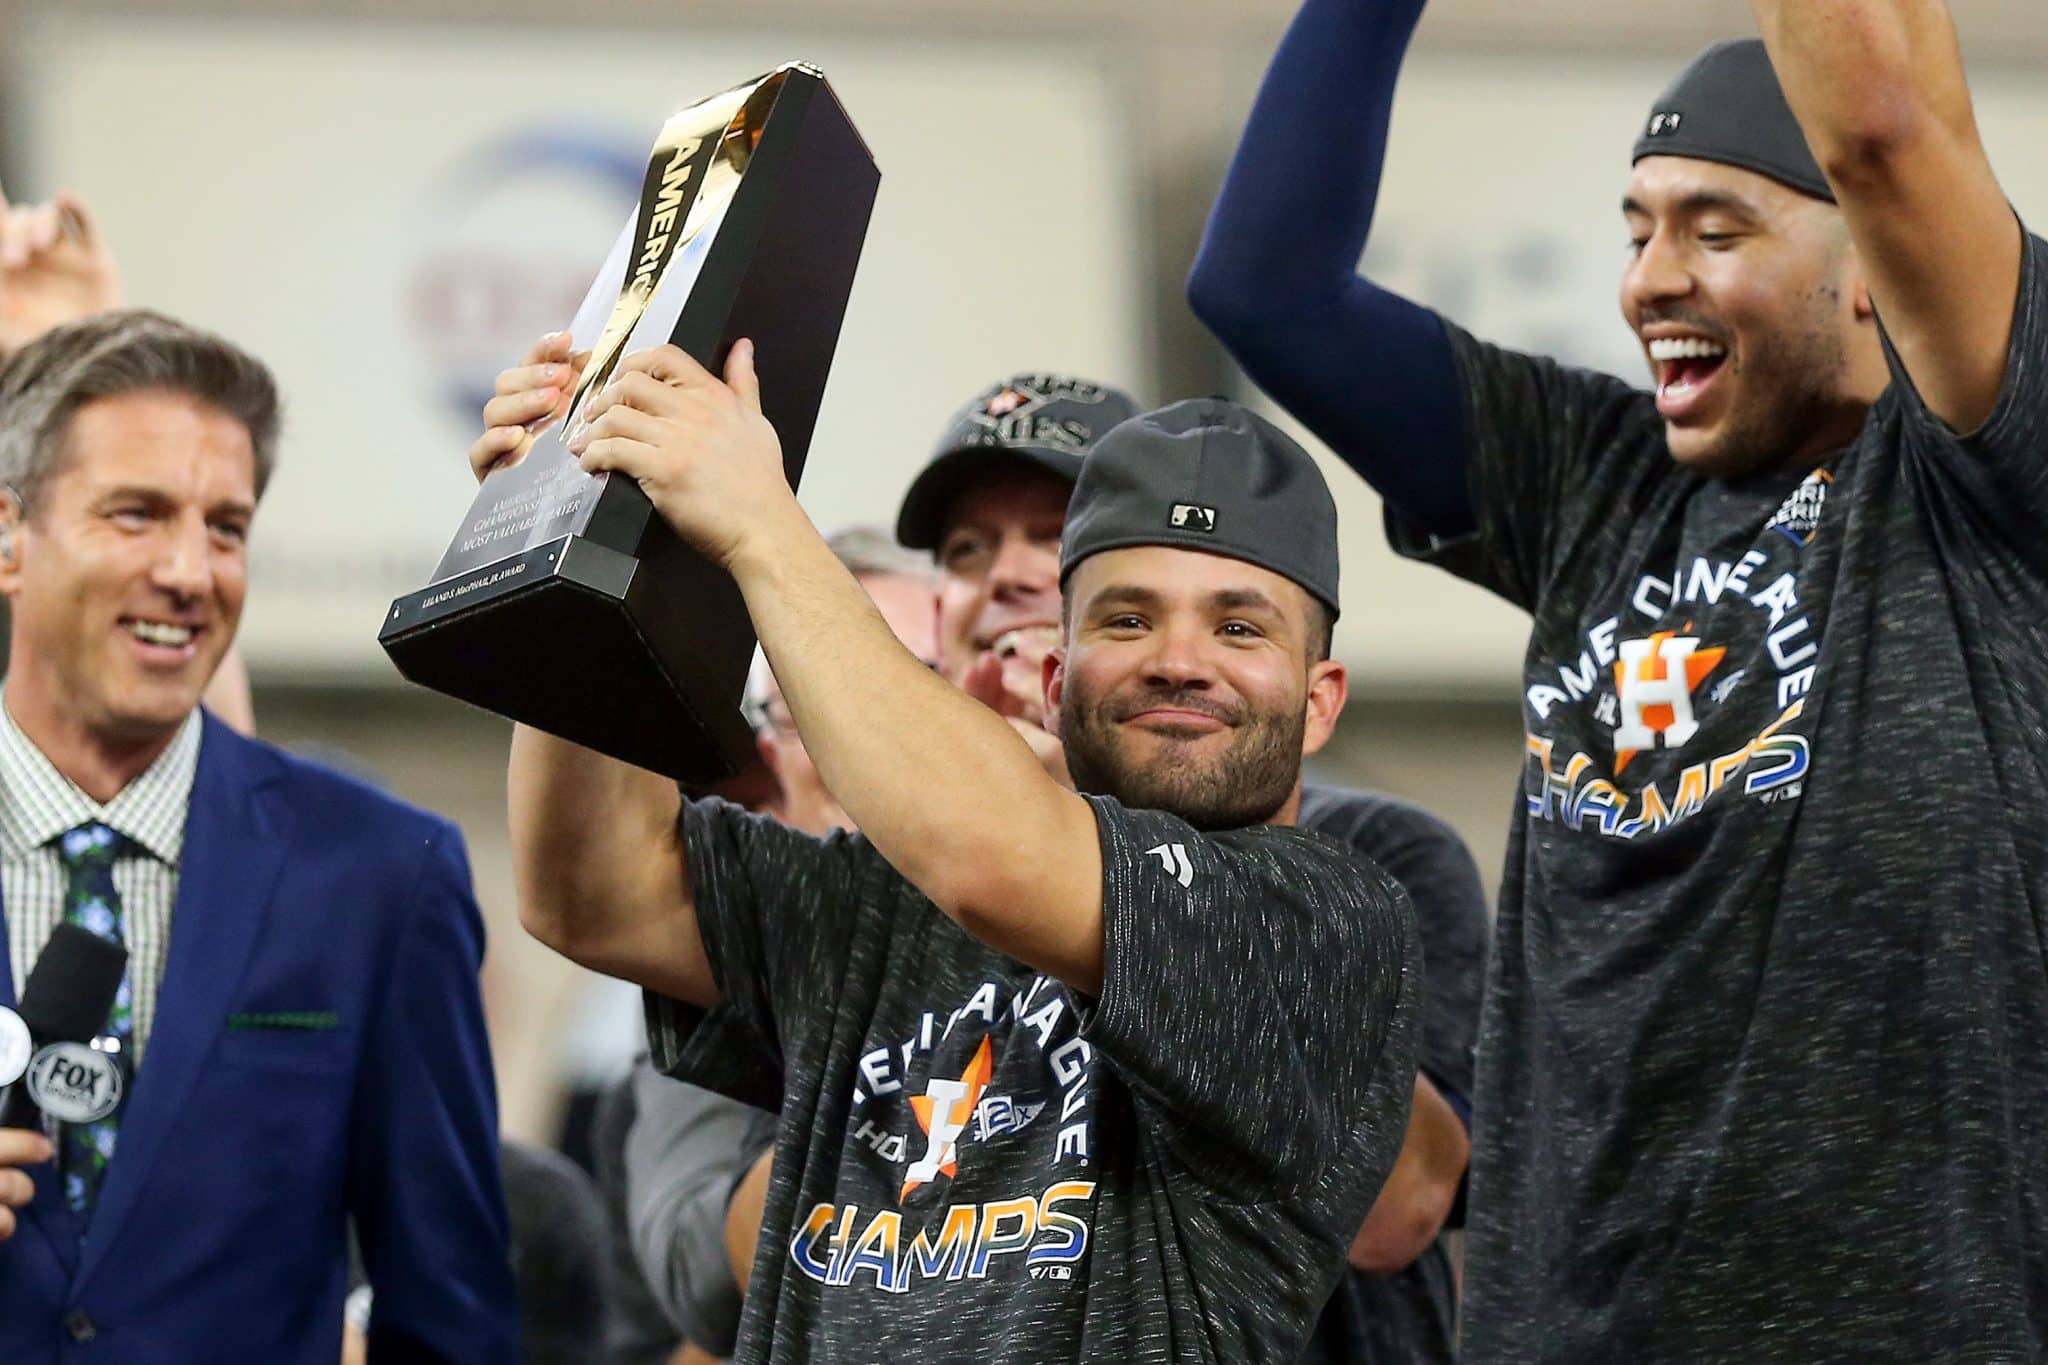 HOUSTON, TEXAS - OCTOBER 19: Jose Altuve #27 of the Houston Astros is awarded series MVP following his teams 6-4 win against the New York Yankees in game six of the American League Championship Series at Minute Maid Park on October 19, 2019 in Houston, Texas.